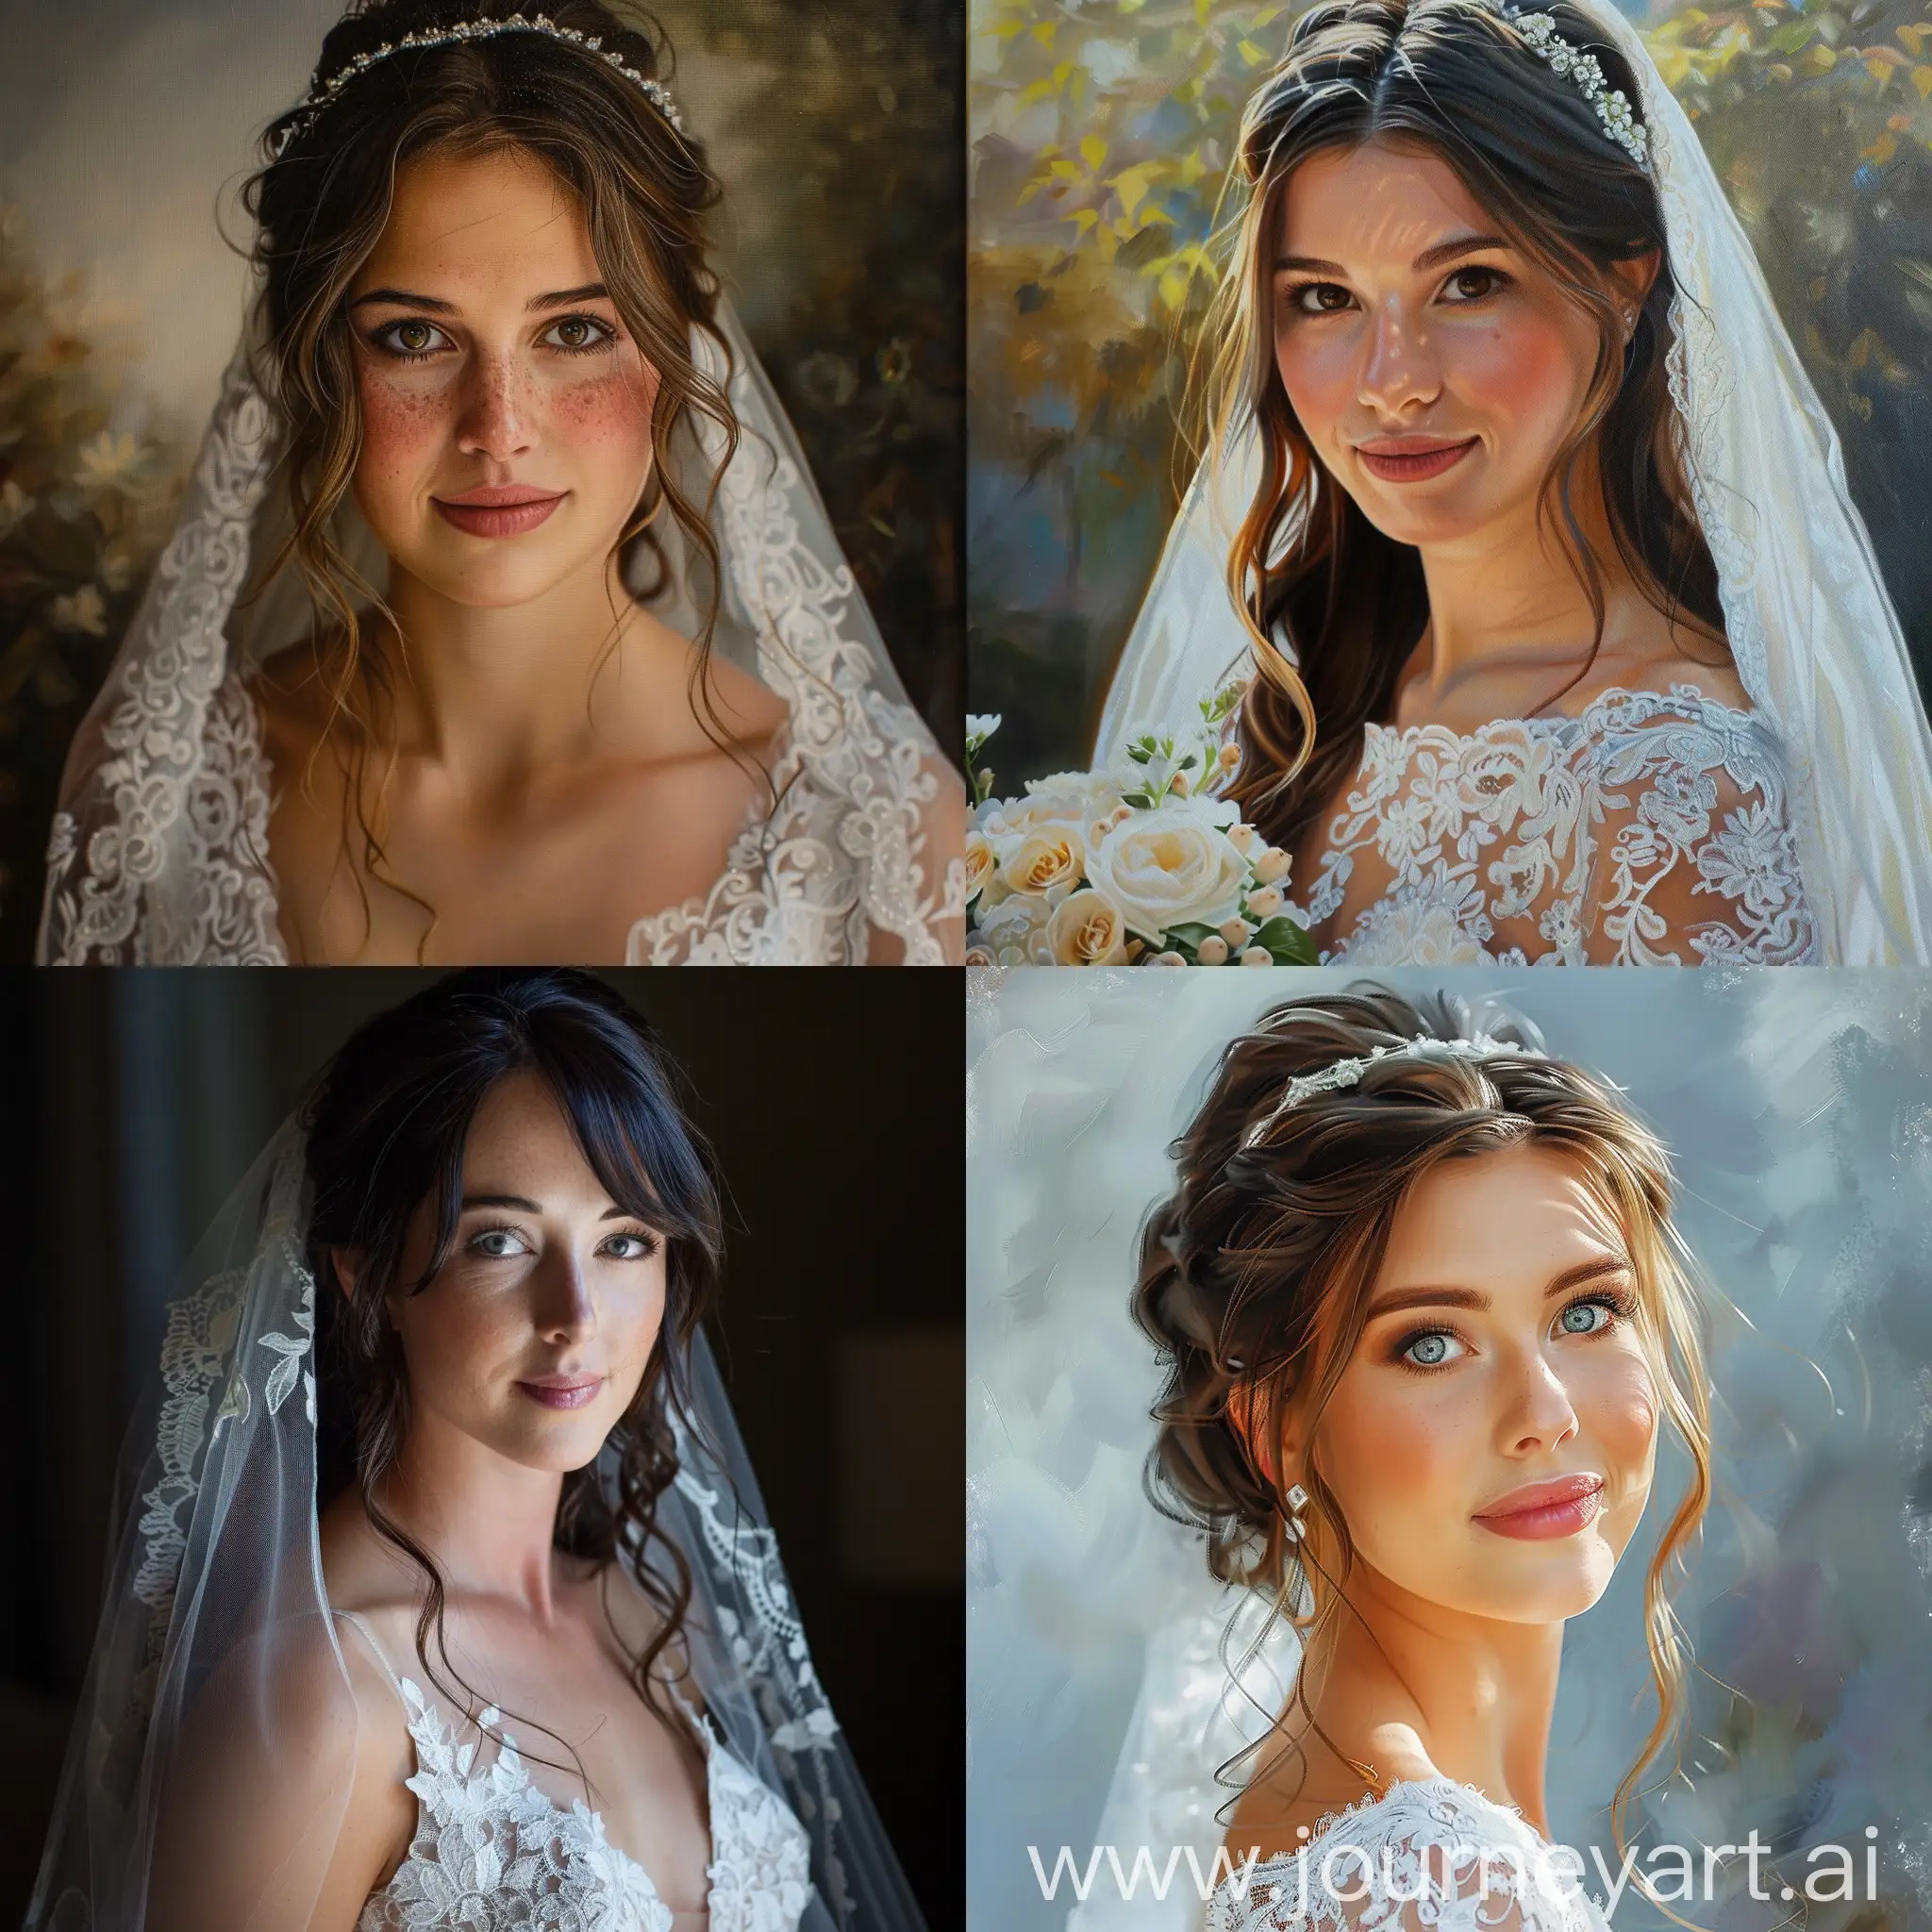 Elegant-Bride-in-Classic-White-Dress-with-Soft-Blush-Makeup